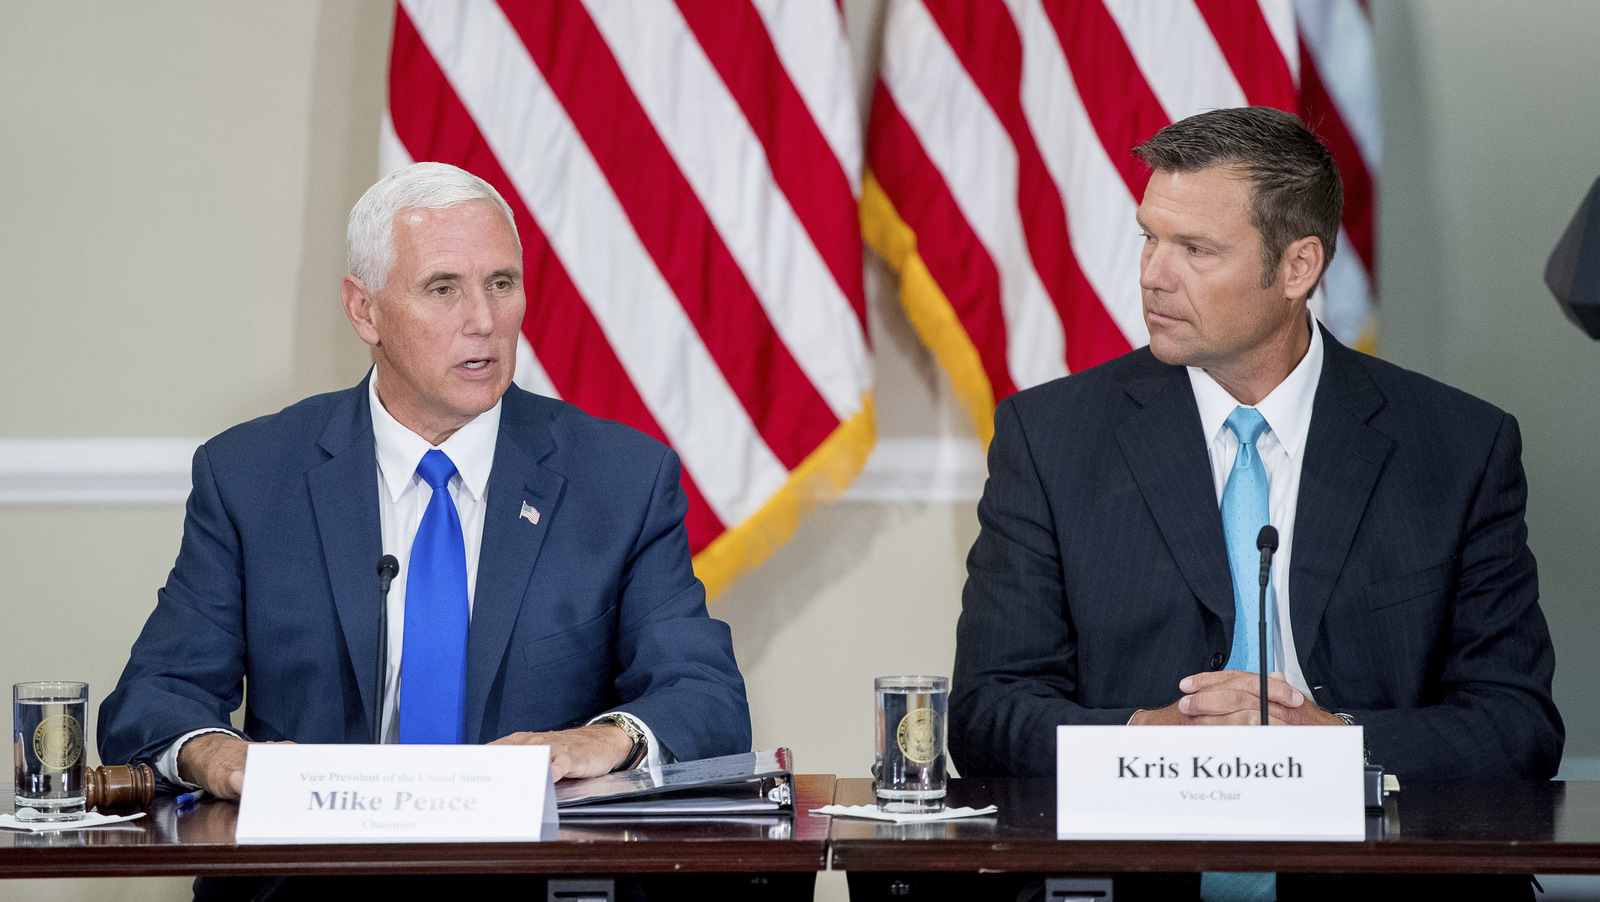 Vice President Mike Pence, left, accompanied by Vice-Char Kansas Secretary of State Kris Kobach, right, speaks during the first meeting of the Presidential Advisory Commission on Election Integrity at the Eisenhower Executive Office Building on the White House complex in Washington, Wednesday, July 19, 2017. (AP Photo/Andrew Harnik)